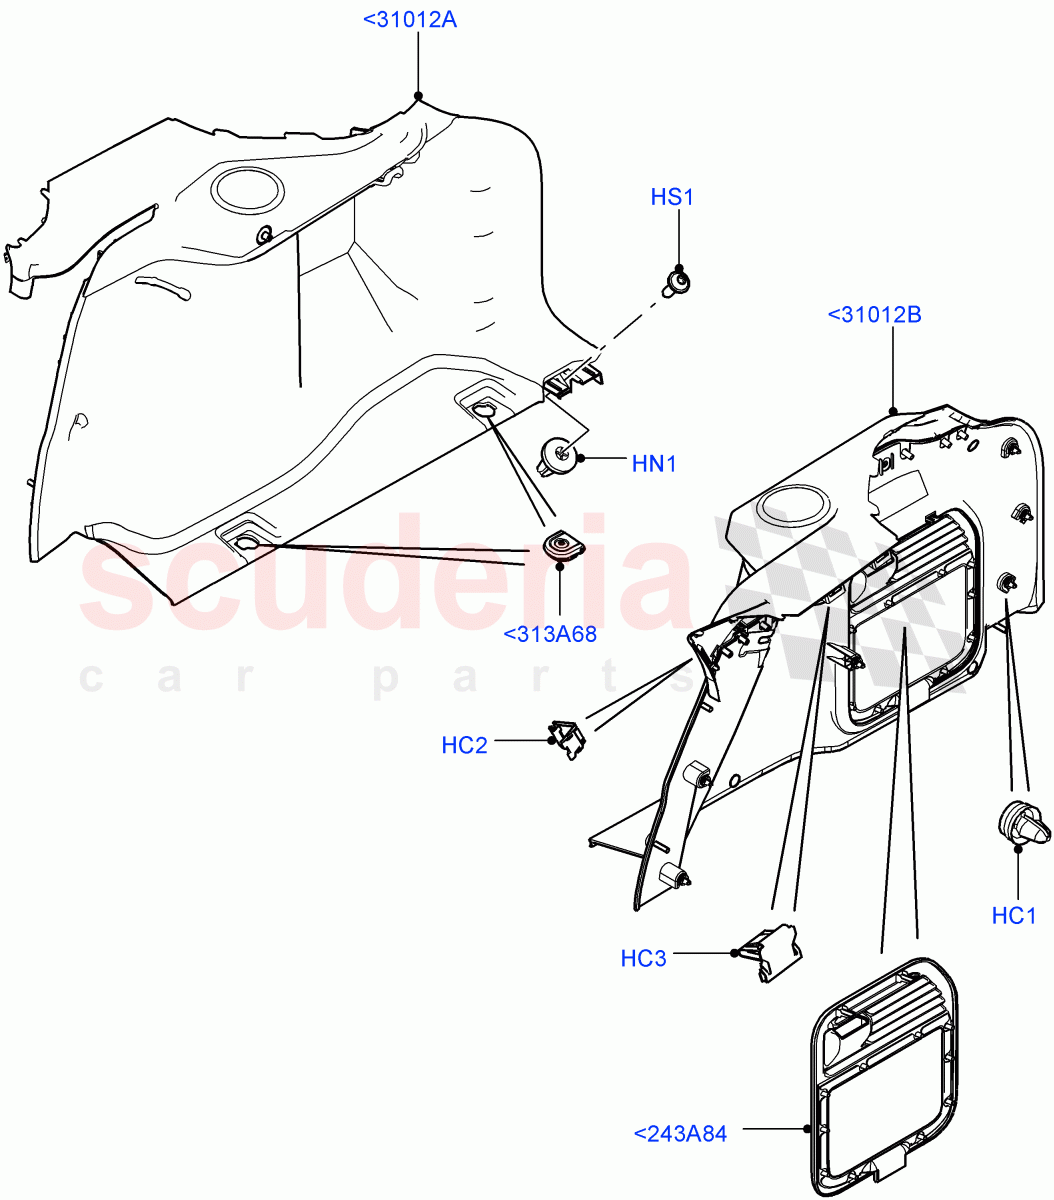 Side Trim(Luggage Compartment)(Itatiaia (Brazil))((V)FROMGT000001) of Land Rover Land Rover Range Rover Evoque (2012-2018) [2.2 Single Turbo Diesel]